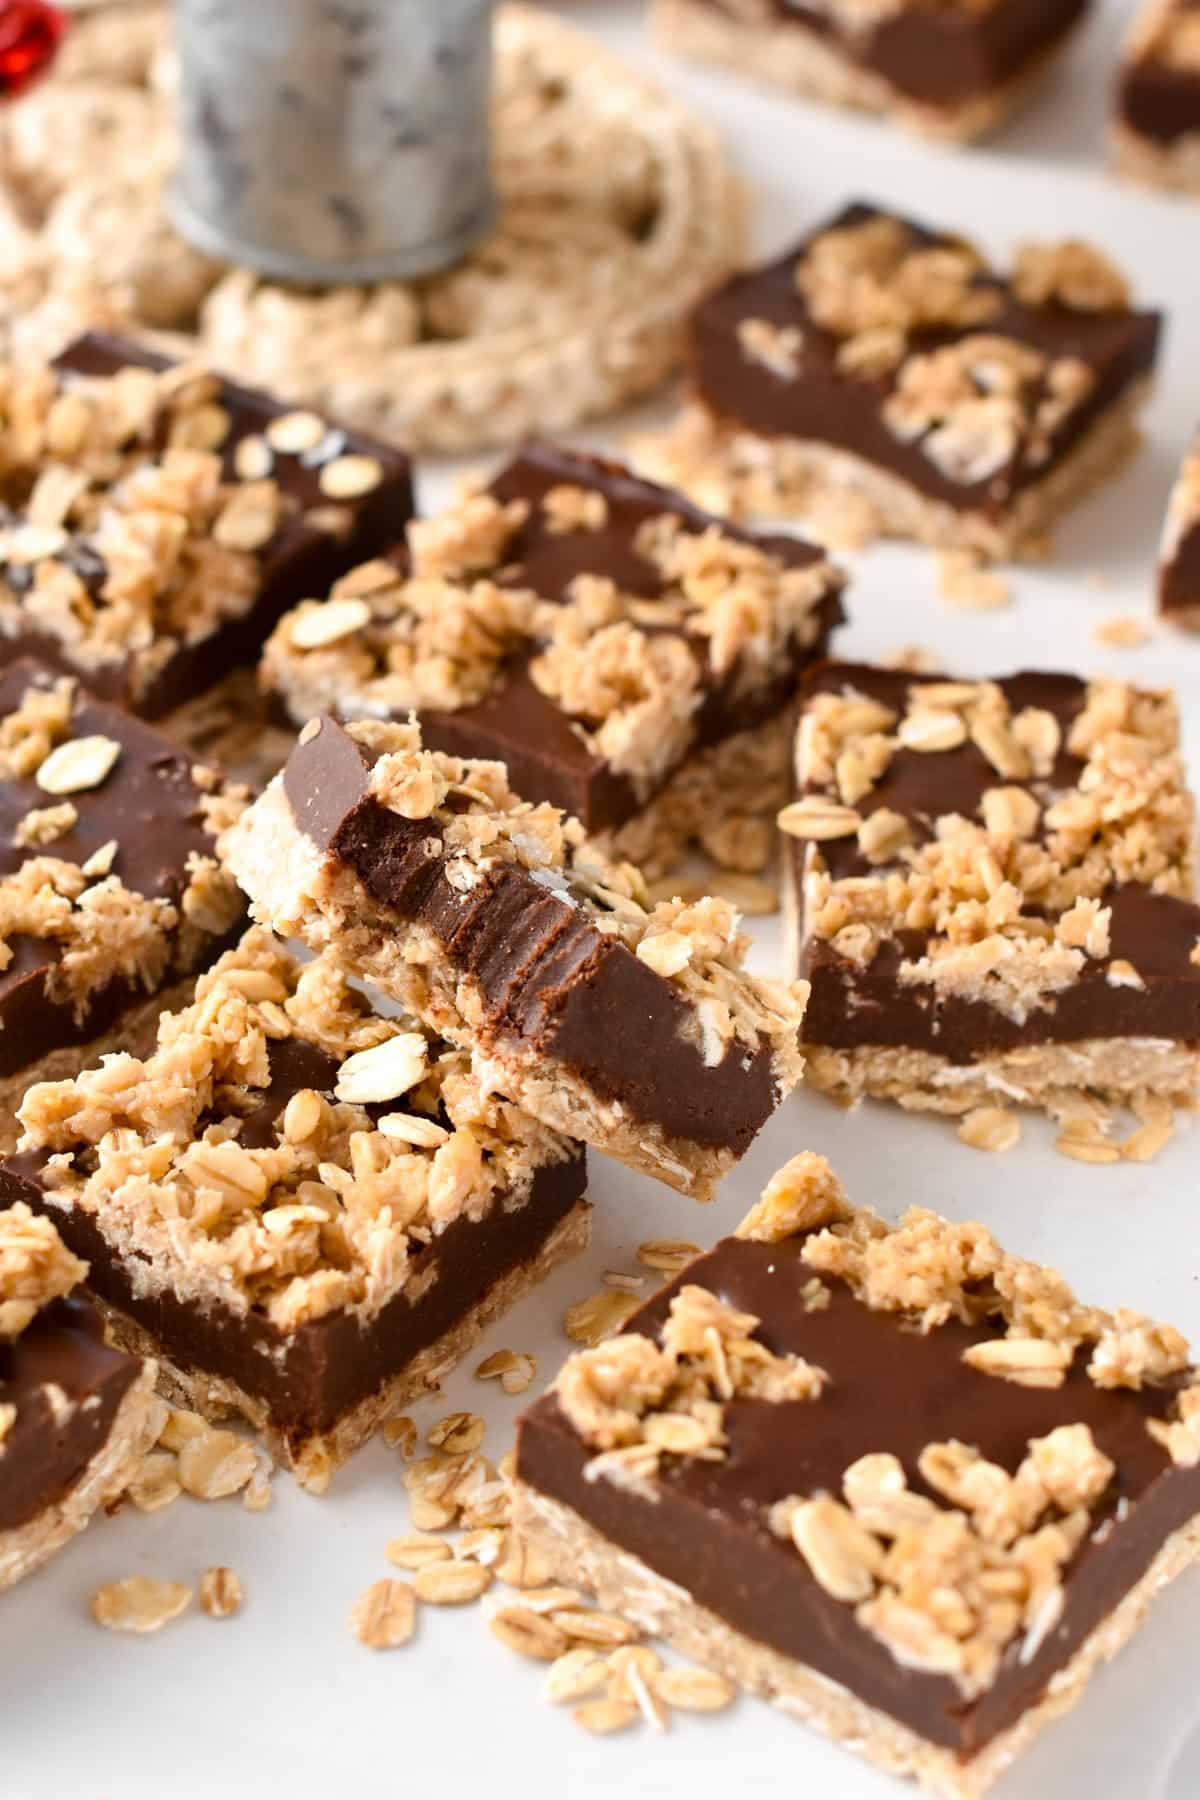 These No-Bake Chocolate Peanut Butter Oatmeal Bars are easy, healthy breakfast or snack for the chocolate peanut butter lovers.